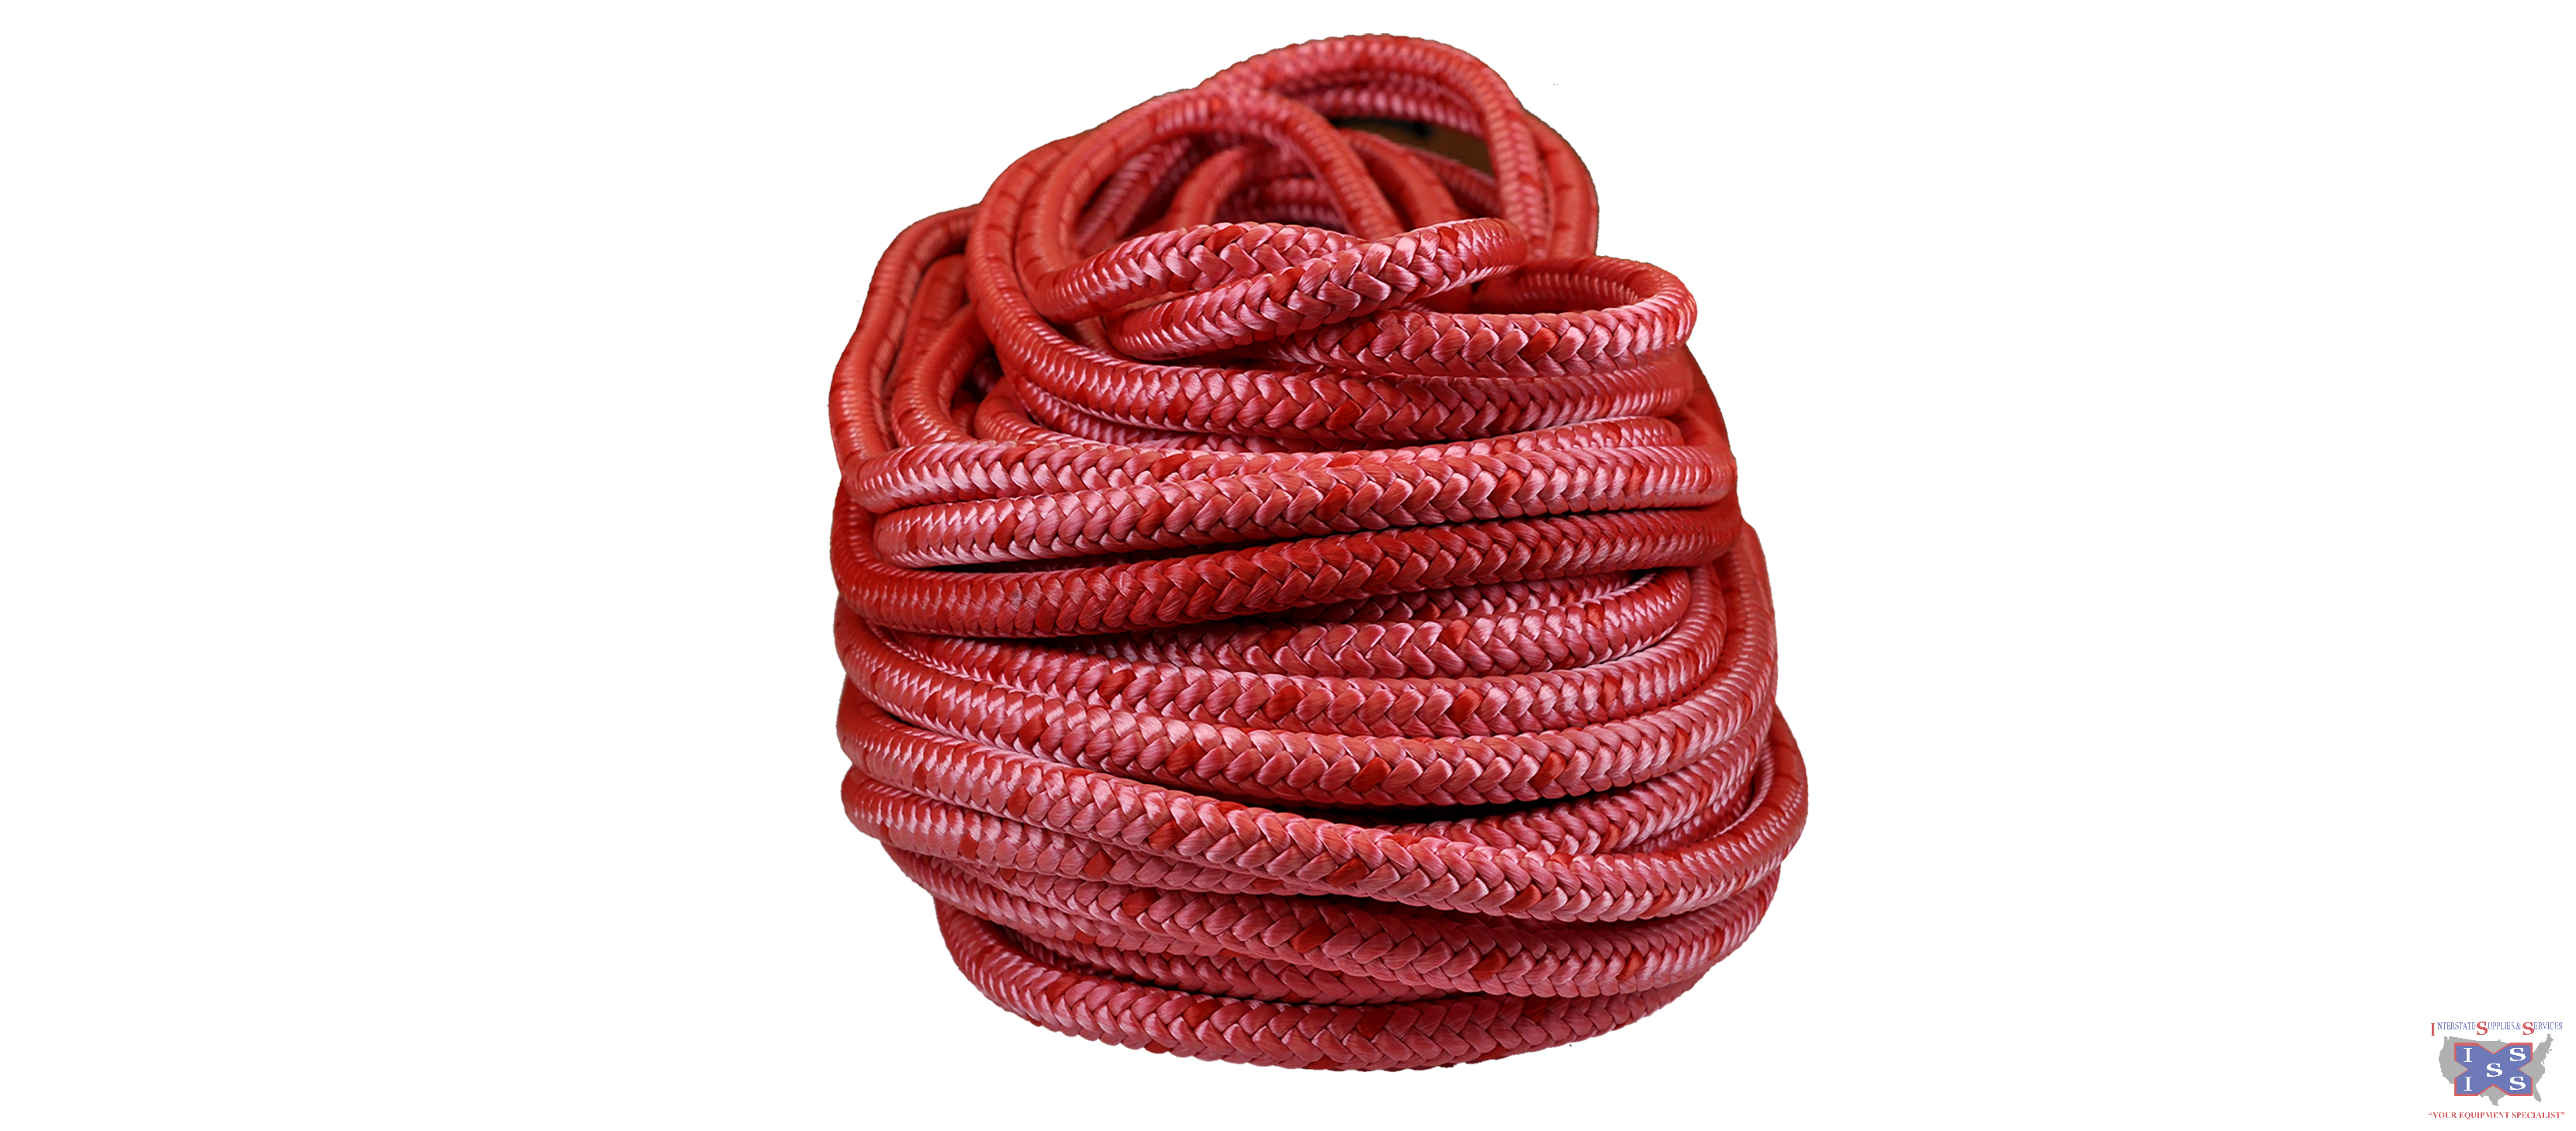 AllGear Forestry Pro 12-Strand Rigging Line 5/8" x 150' - Click Image to Close